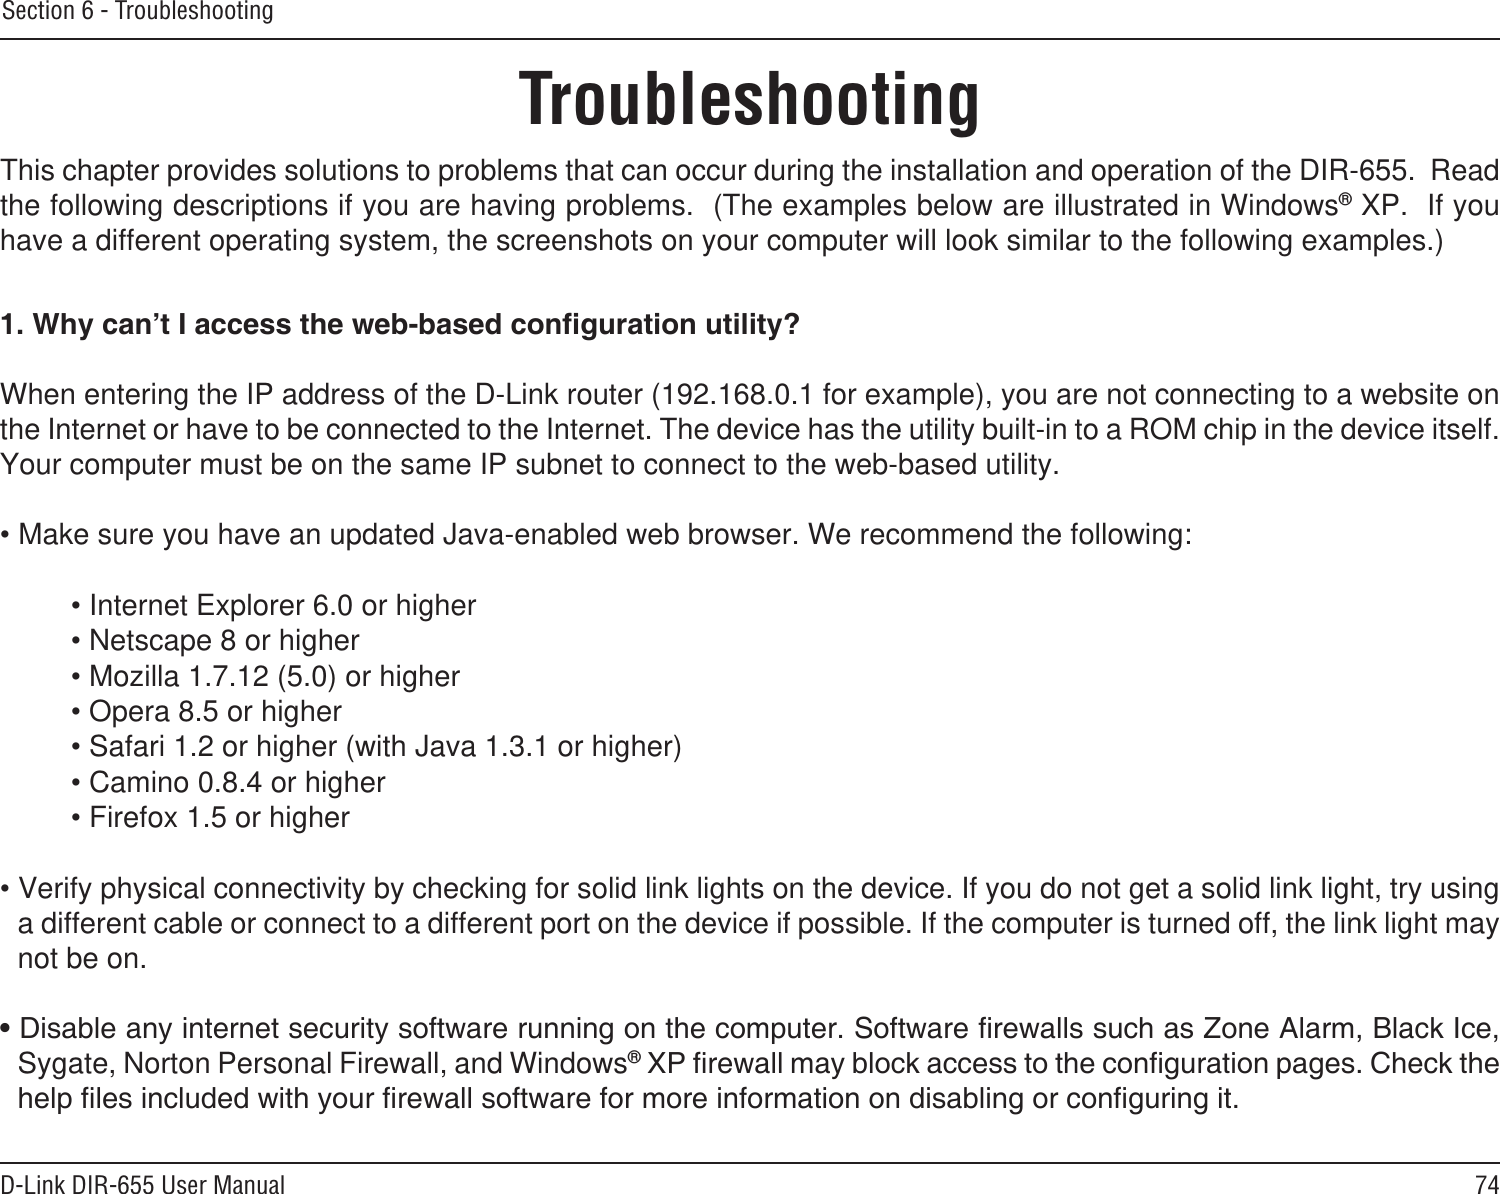 74D-Link DIR-655 User ManualSection 6 - TroubleshootingTroubleshootingThis chapter provides solutions to problems that can occur during the installation and operation of the DIR-655.  Read the following descriptions if you are having problems.  (The examples below are illustrated in Windows® XP.  If you have a different operating system, the screenshots on your computer will look similar to the following examples.)When entering the IP address of the D-Link router (192.168.0.1 for example), you are not connecting to a website on the Internet or have to be connected to the Internet. The device has the utility built-in to a ROM chip in the device itself. Your computer must be on the same IP subnet to connect to the web-based utility. • Make sure you have an updated Java-enabled web browser. We recommend the following: • Internet Explorer 6.0 or higher • Netscape 8 or higher • Mozilla 1.7.12 (5.0) or higher • Opera 8.5 or higher • Safari 1.2 or higher (with Java 1.3.1 or higher) • Camino 0.8.4 or higher • Firefox 1.5 or higher • Verify physical connectivity by checking for solid link lights on the device. If you do not get a solid link light, try using a different cable or connect to a different port on the device if possible. If the computer is turned off, the link light may not be on.Sygate, Norton Personal Firewall, and Windows®